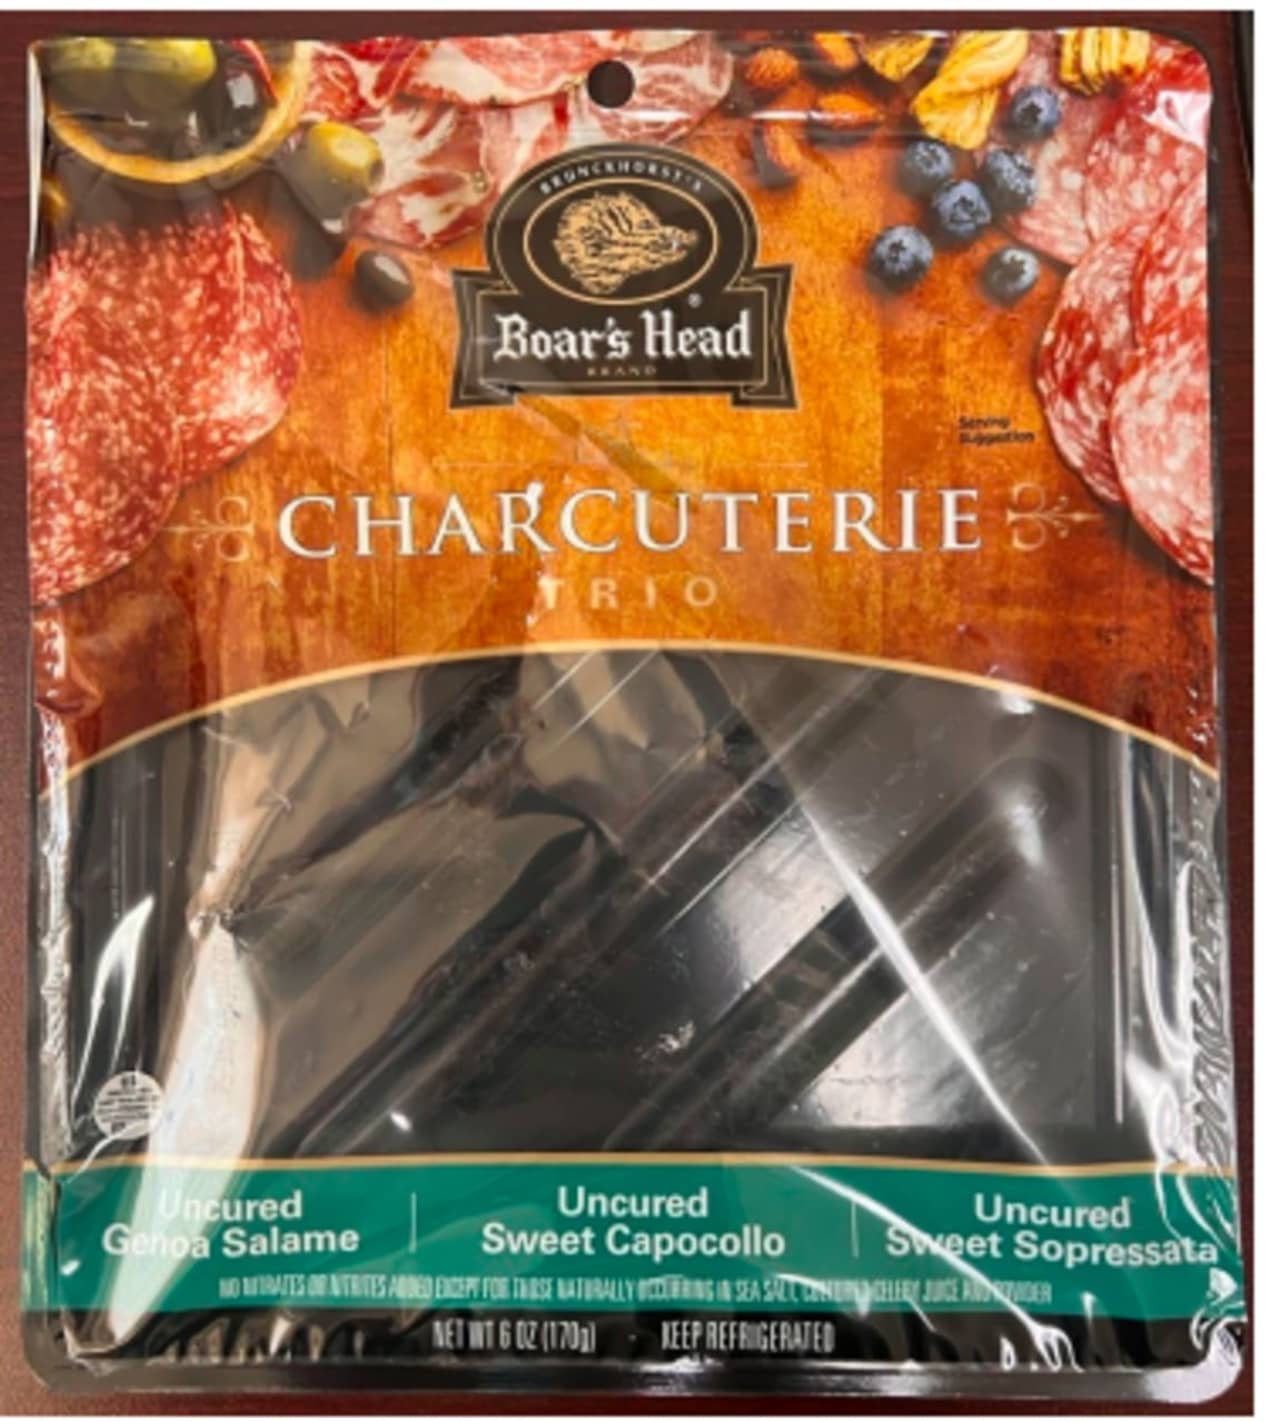 One of the recalled products: Boar’s Head charcutuerie trio.